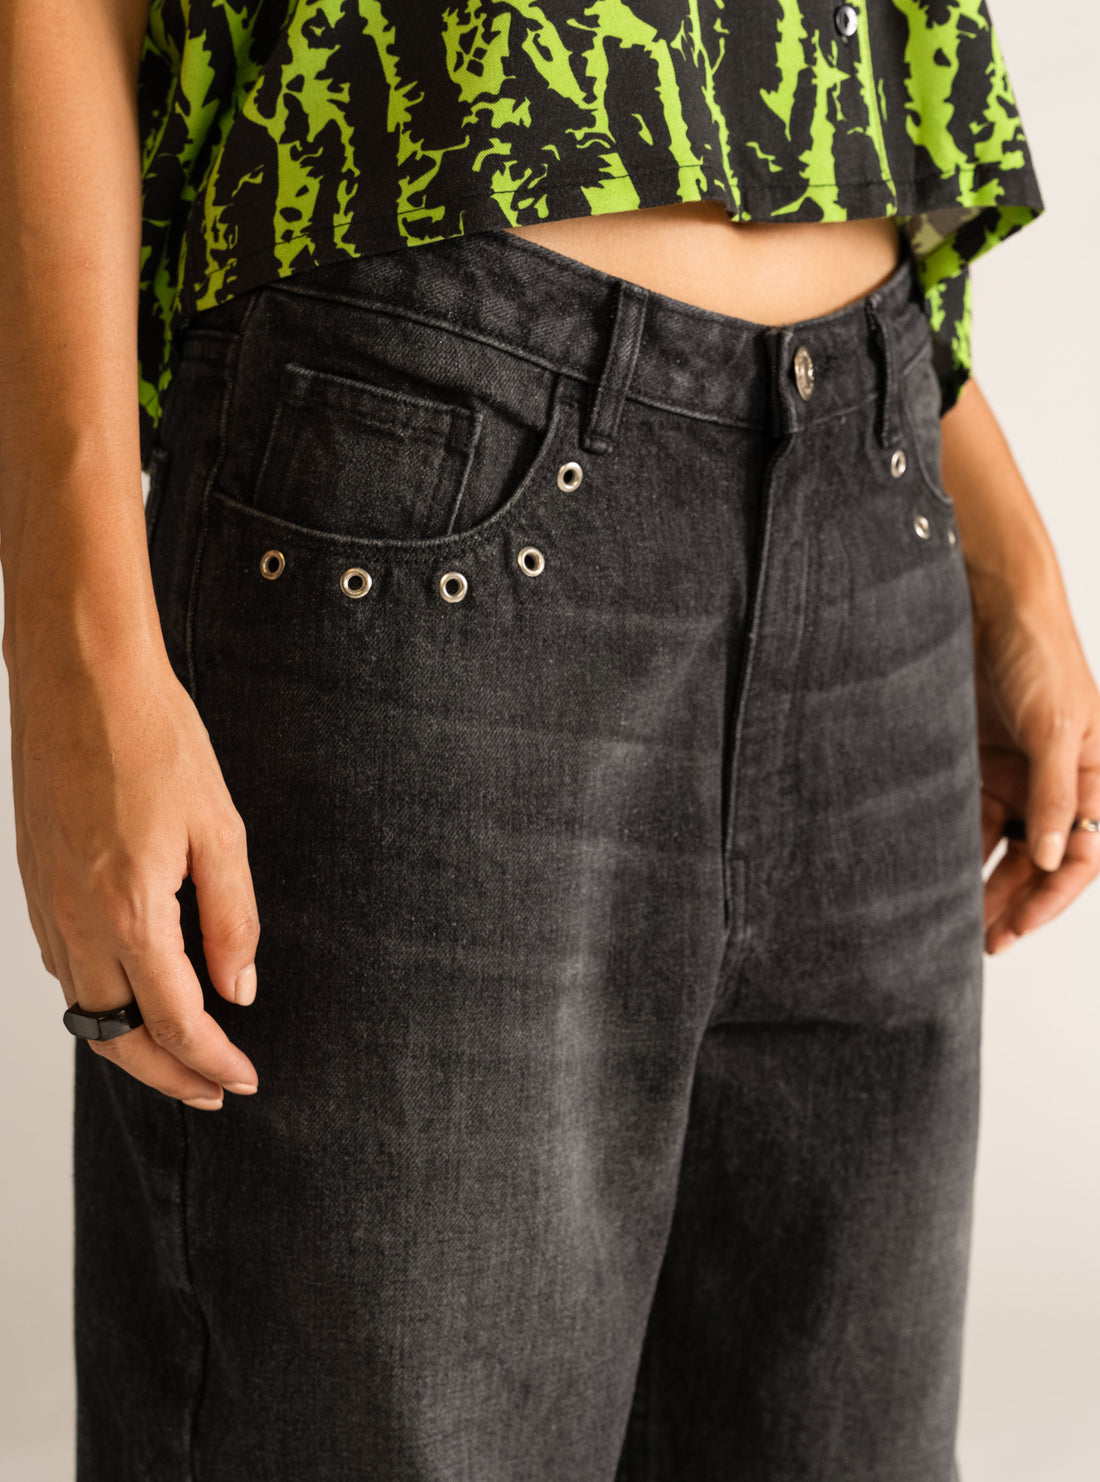 Fever Dream Baggy Jeans, Negro